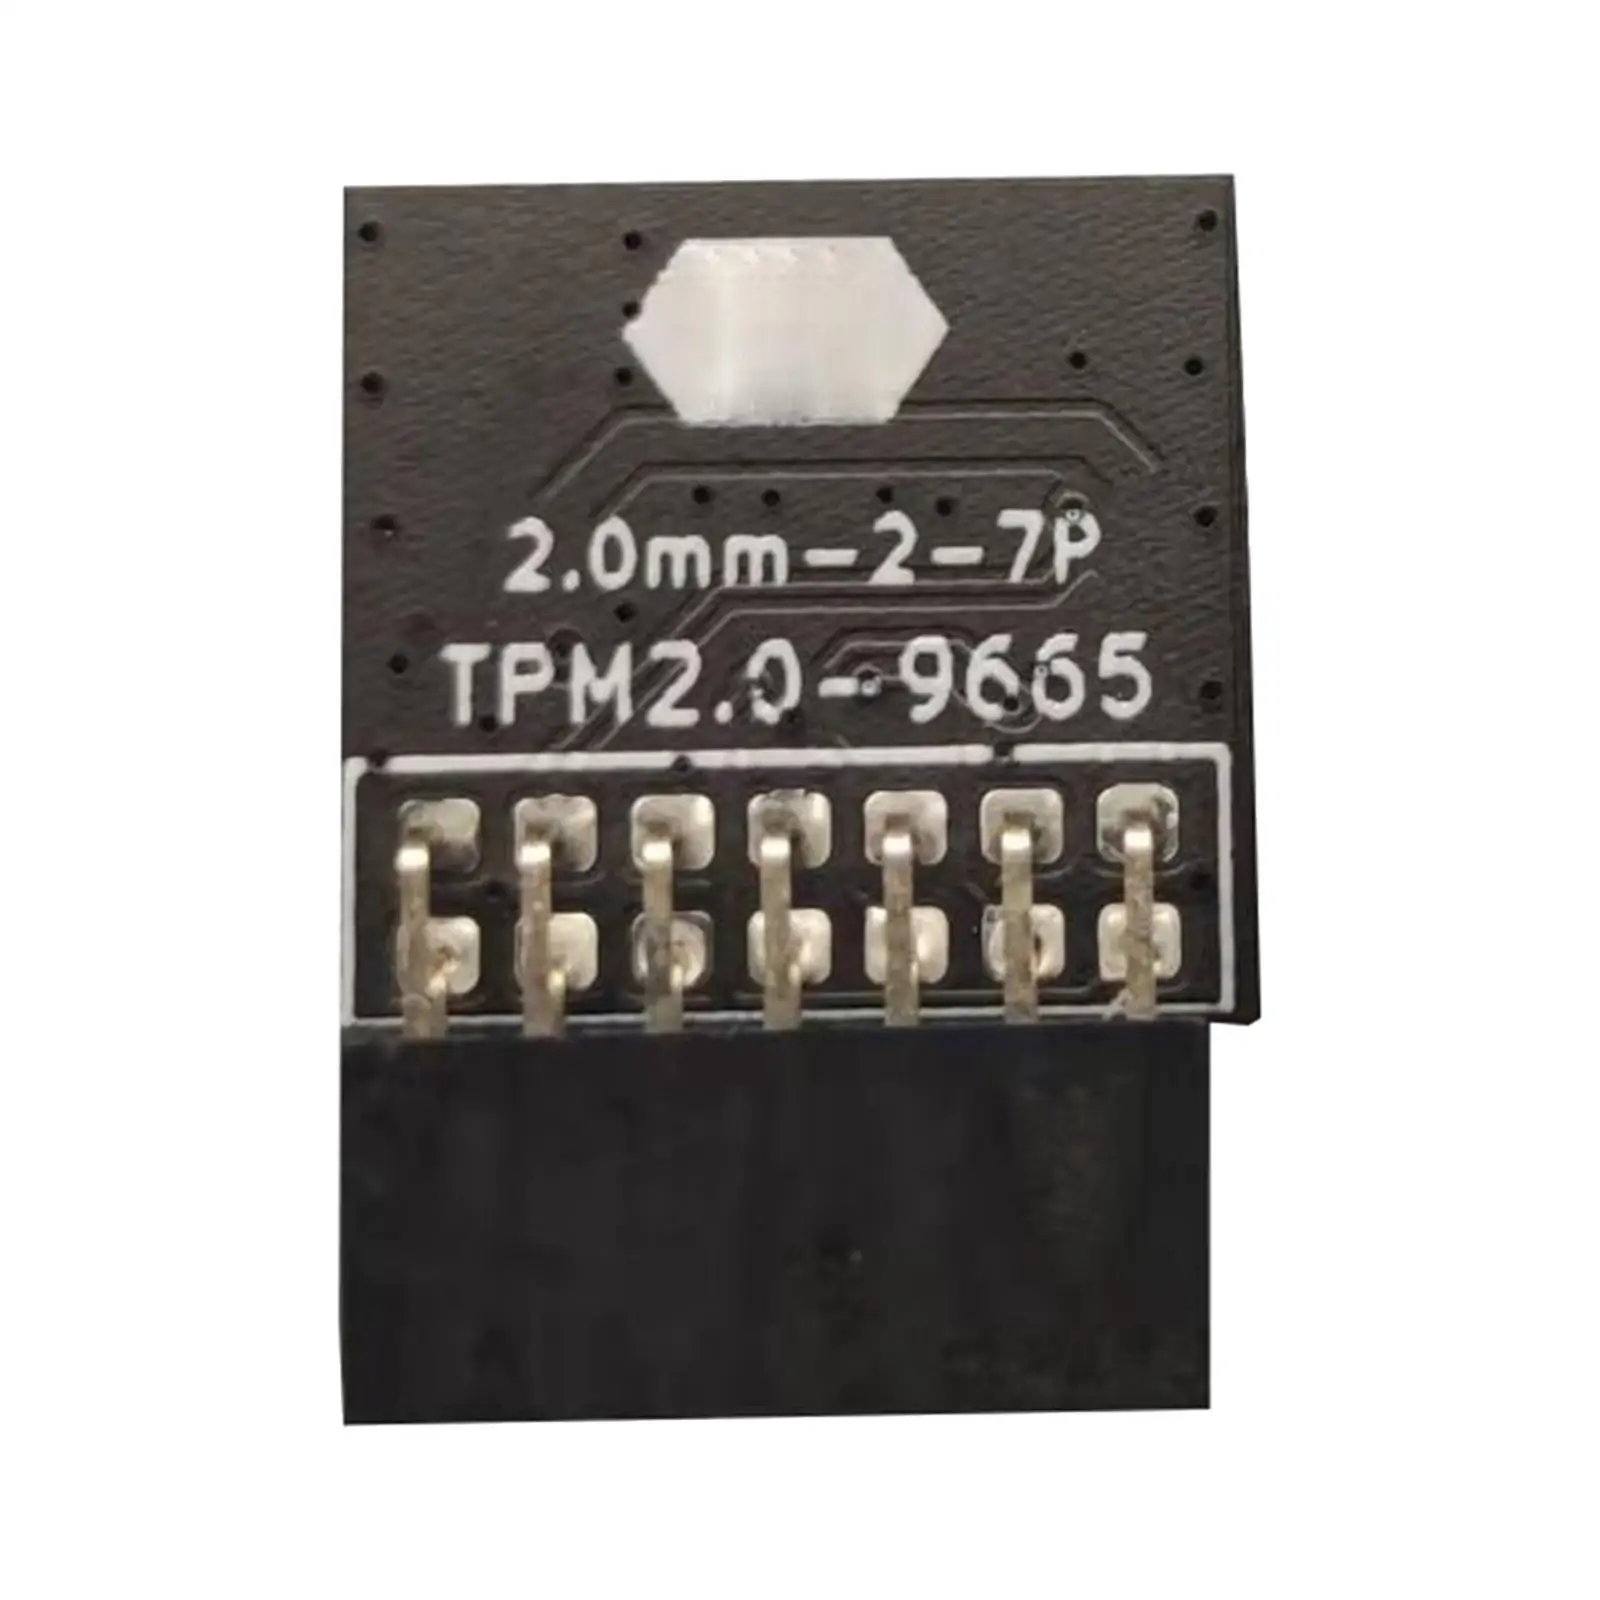 Lpc Tpm 2.0 Module Board Cryptographic Processor Encryption Computer Security Module Remote Card for Gigabyte for Windows 11